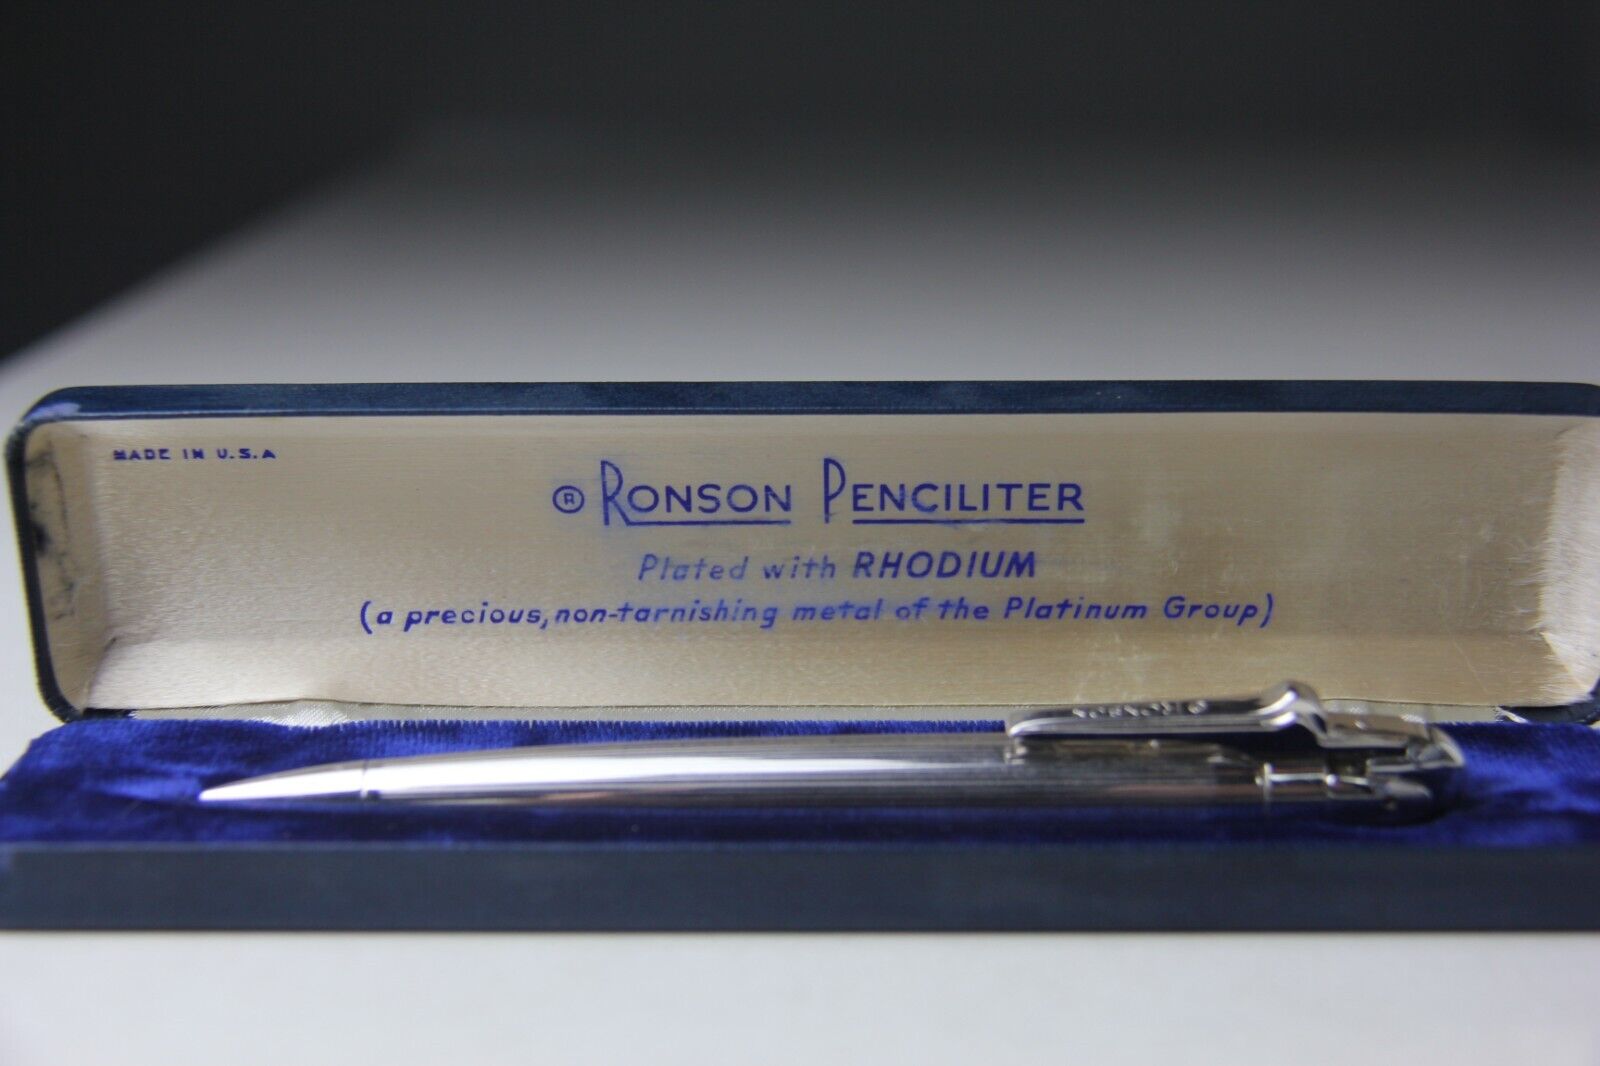 Ronson Penciliter, Rhodium Plated, with Box